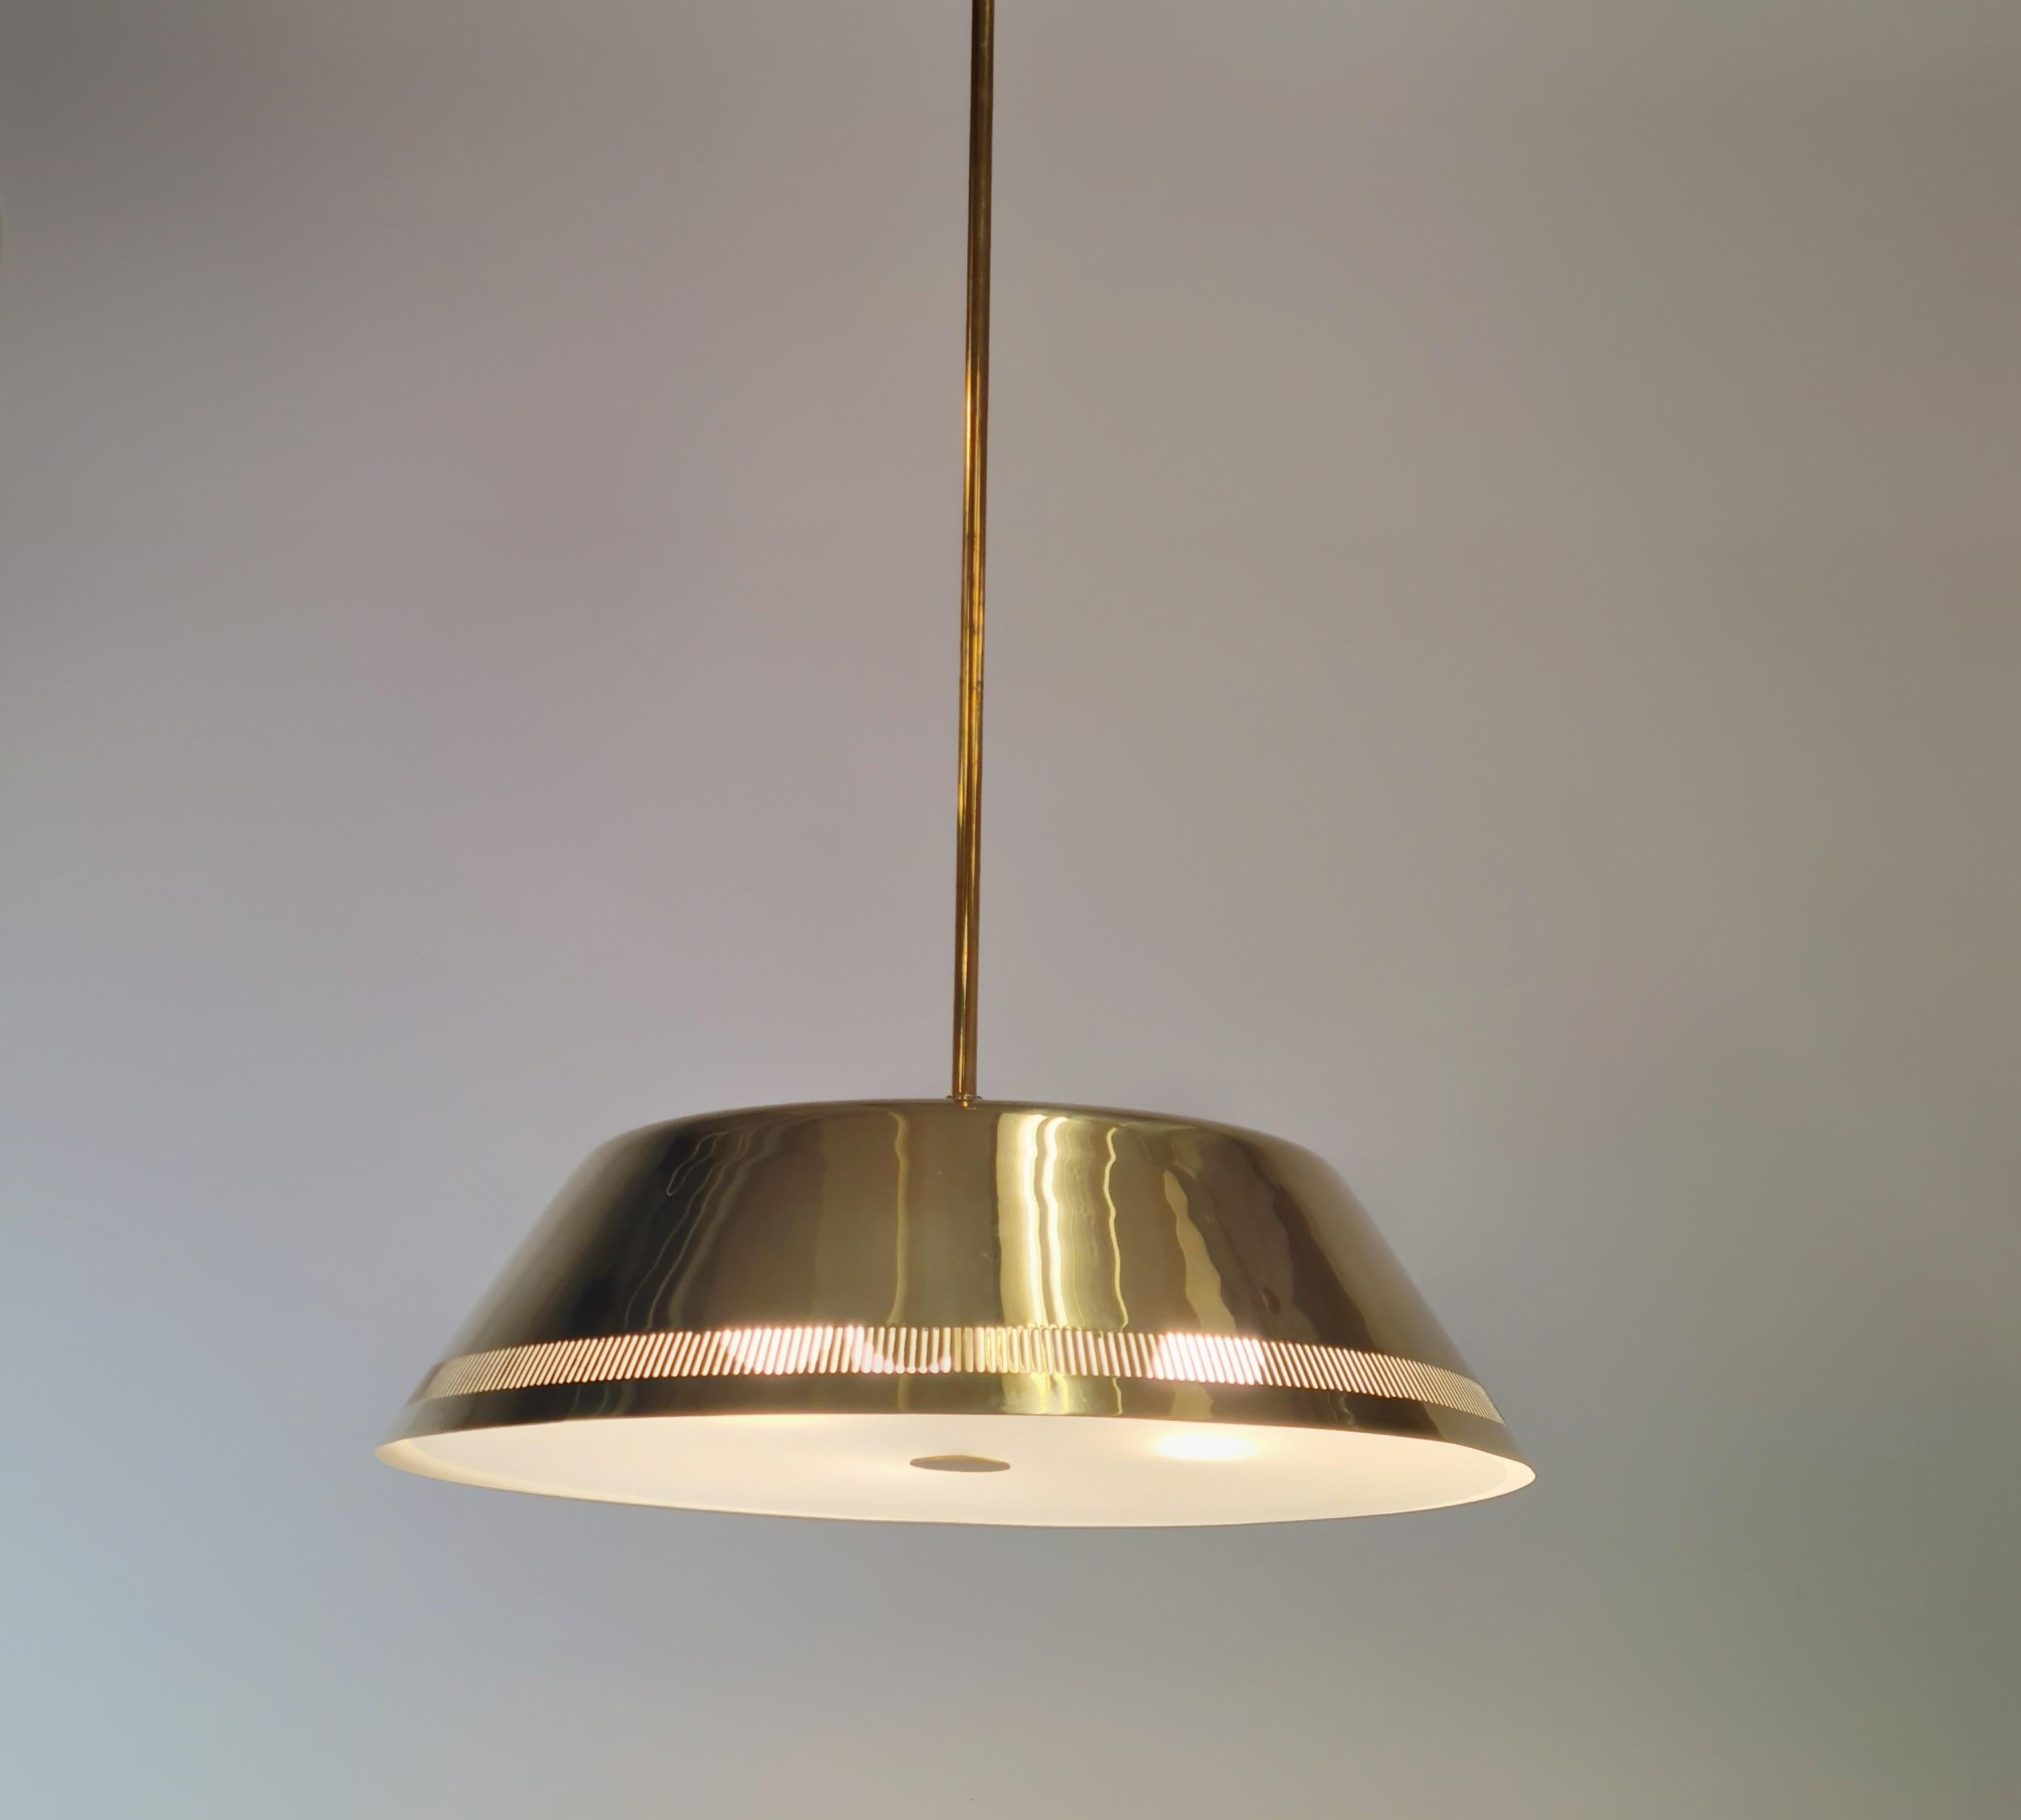 A Magnificent Paavo Tynell Ceiling Lamp Model 82500 for Idman, 1950s In Good Condition For Sale In Helsinki, FI